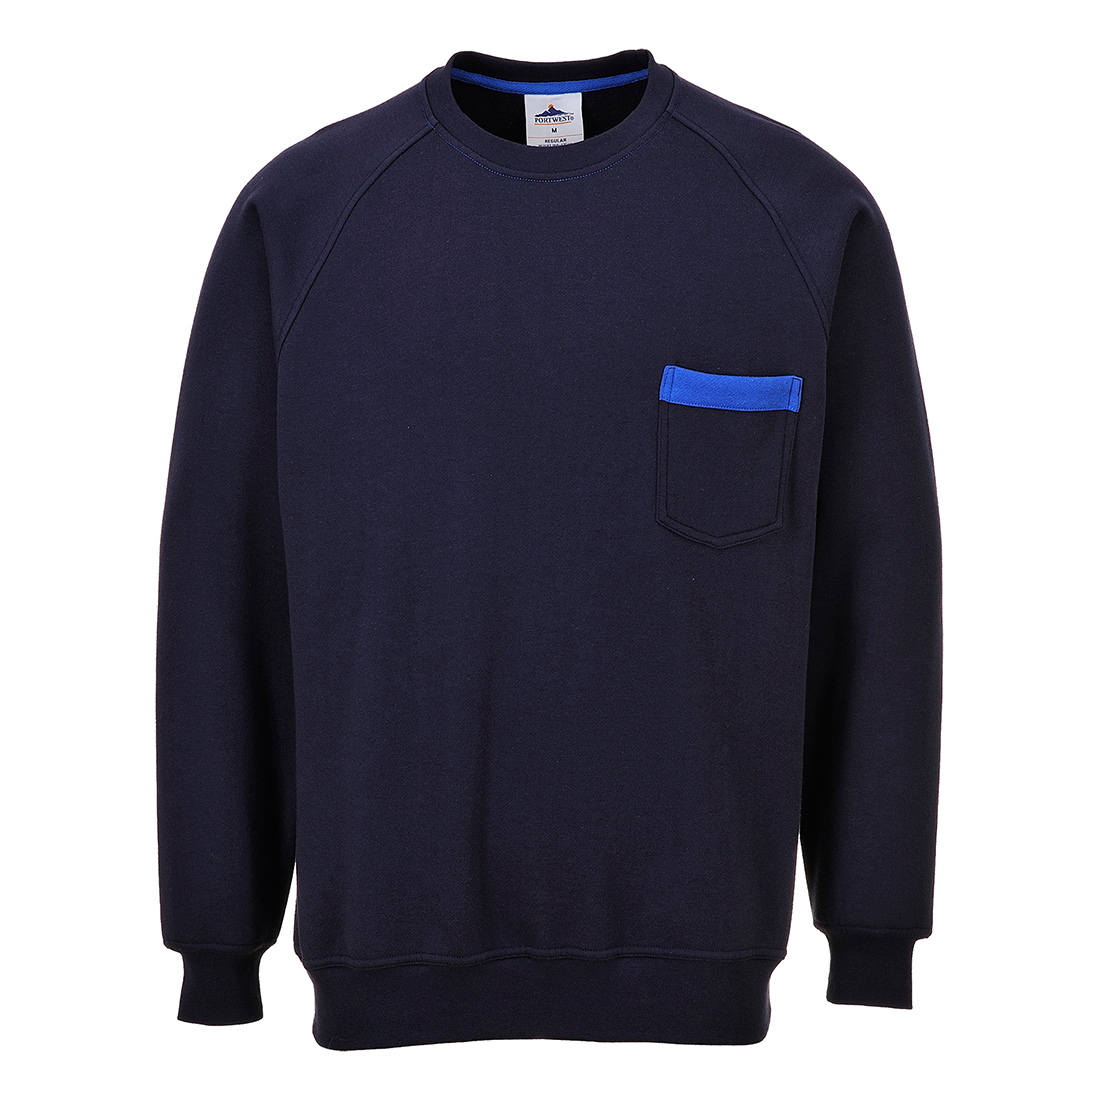 Portwest Texo Sweater Size S Navy